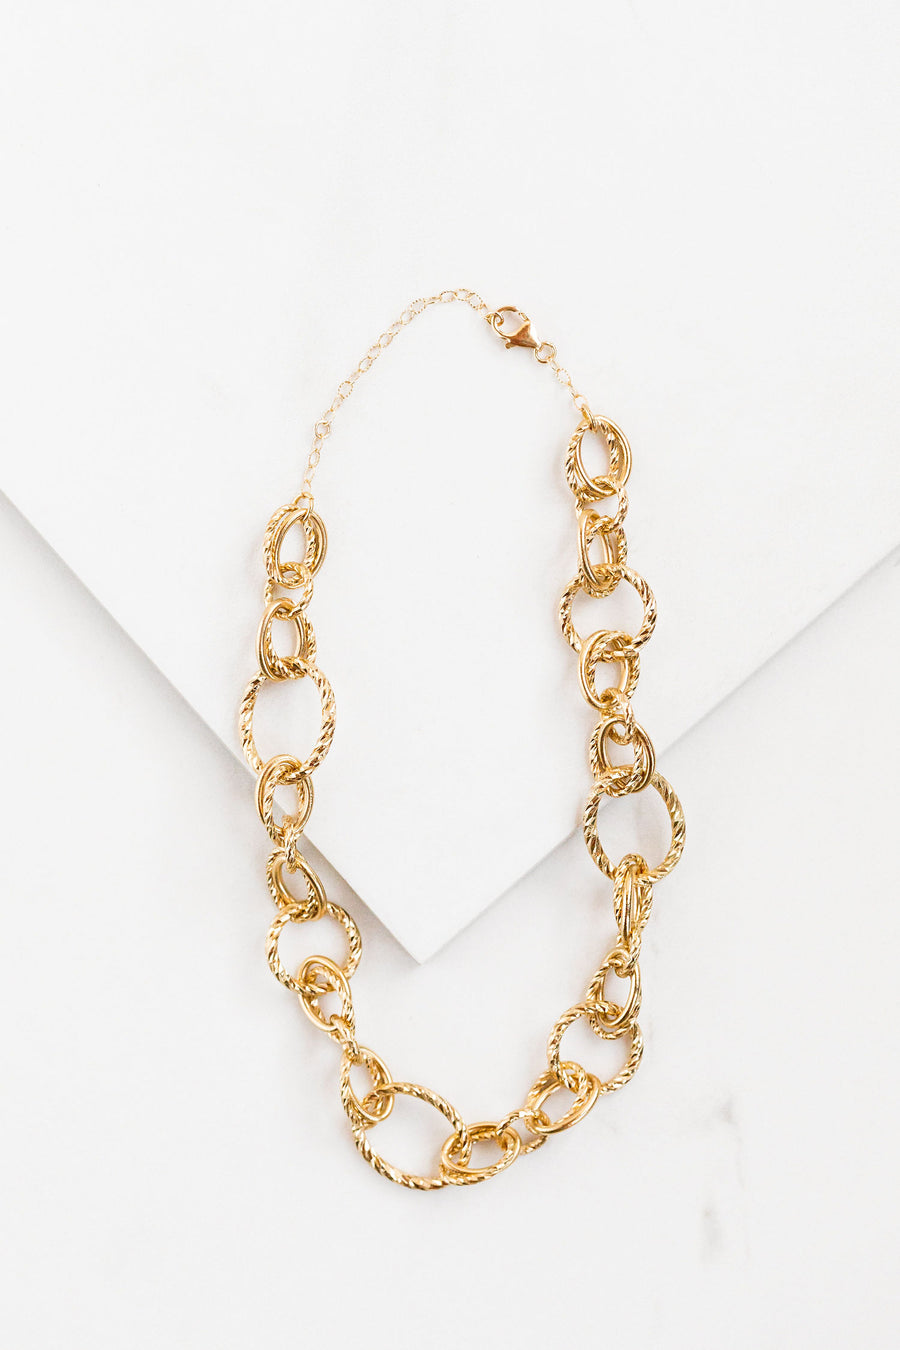 Find the perfect necklace you're looking for from Charme Silkiner! This beautiful 24k gold overlay with diamond cut chain necklace is simple yet perfect. Great for layering or wearing alone the Guiliana Necklace is the perfect piece of unique jewelry that everyone should own.